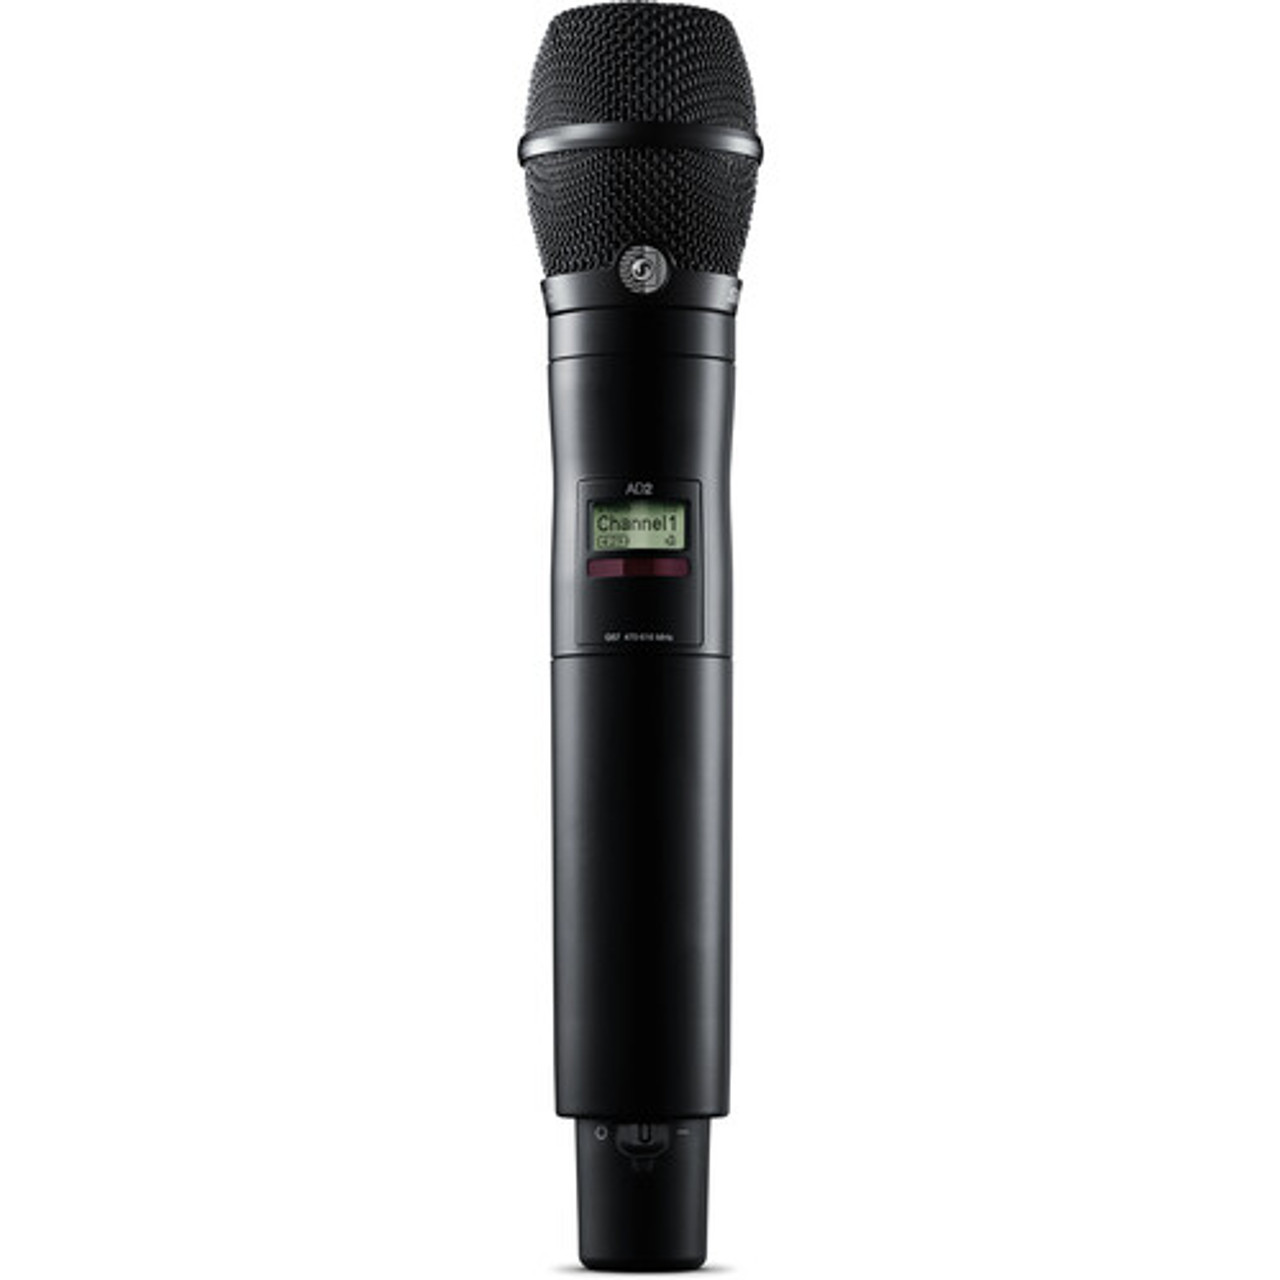 Shure AD2/K11 Digital Handheld Wireless Microphone Transmitter with KSM11 Capsule (G57: 470 to 616 MHz) (AD2/K11B=-G57-)